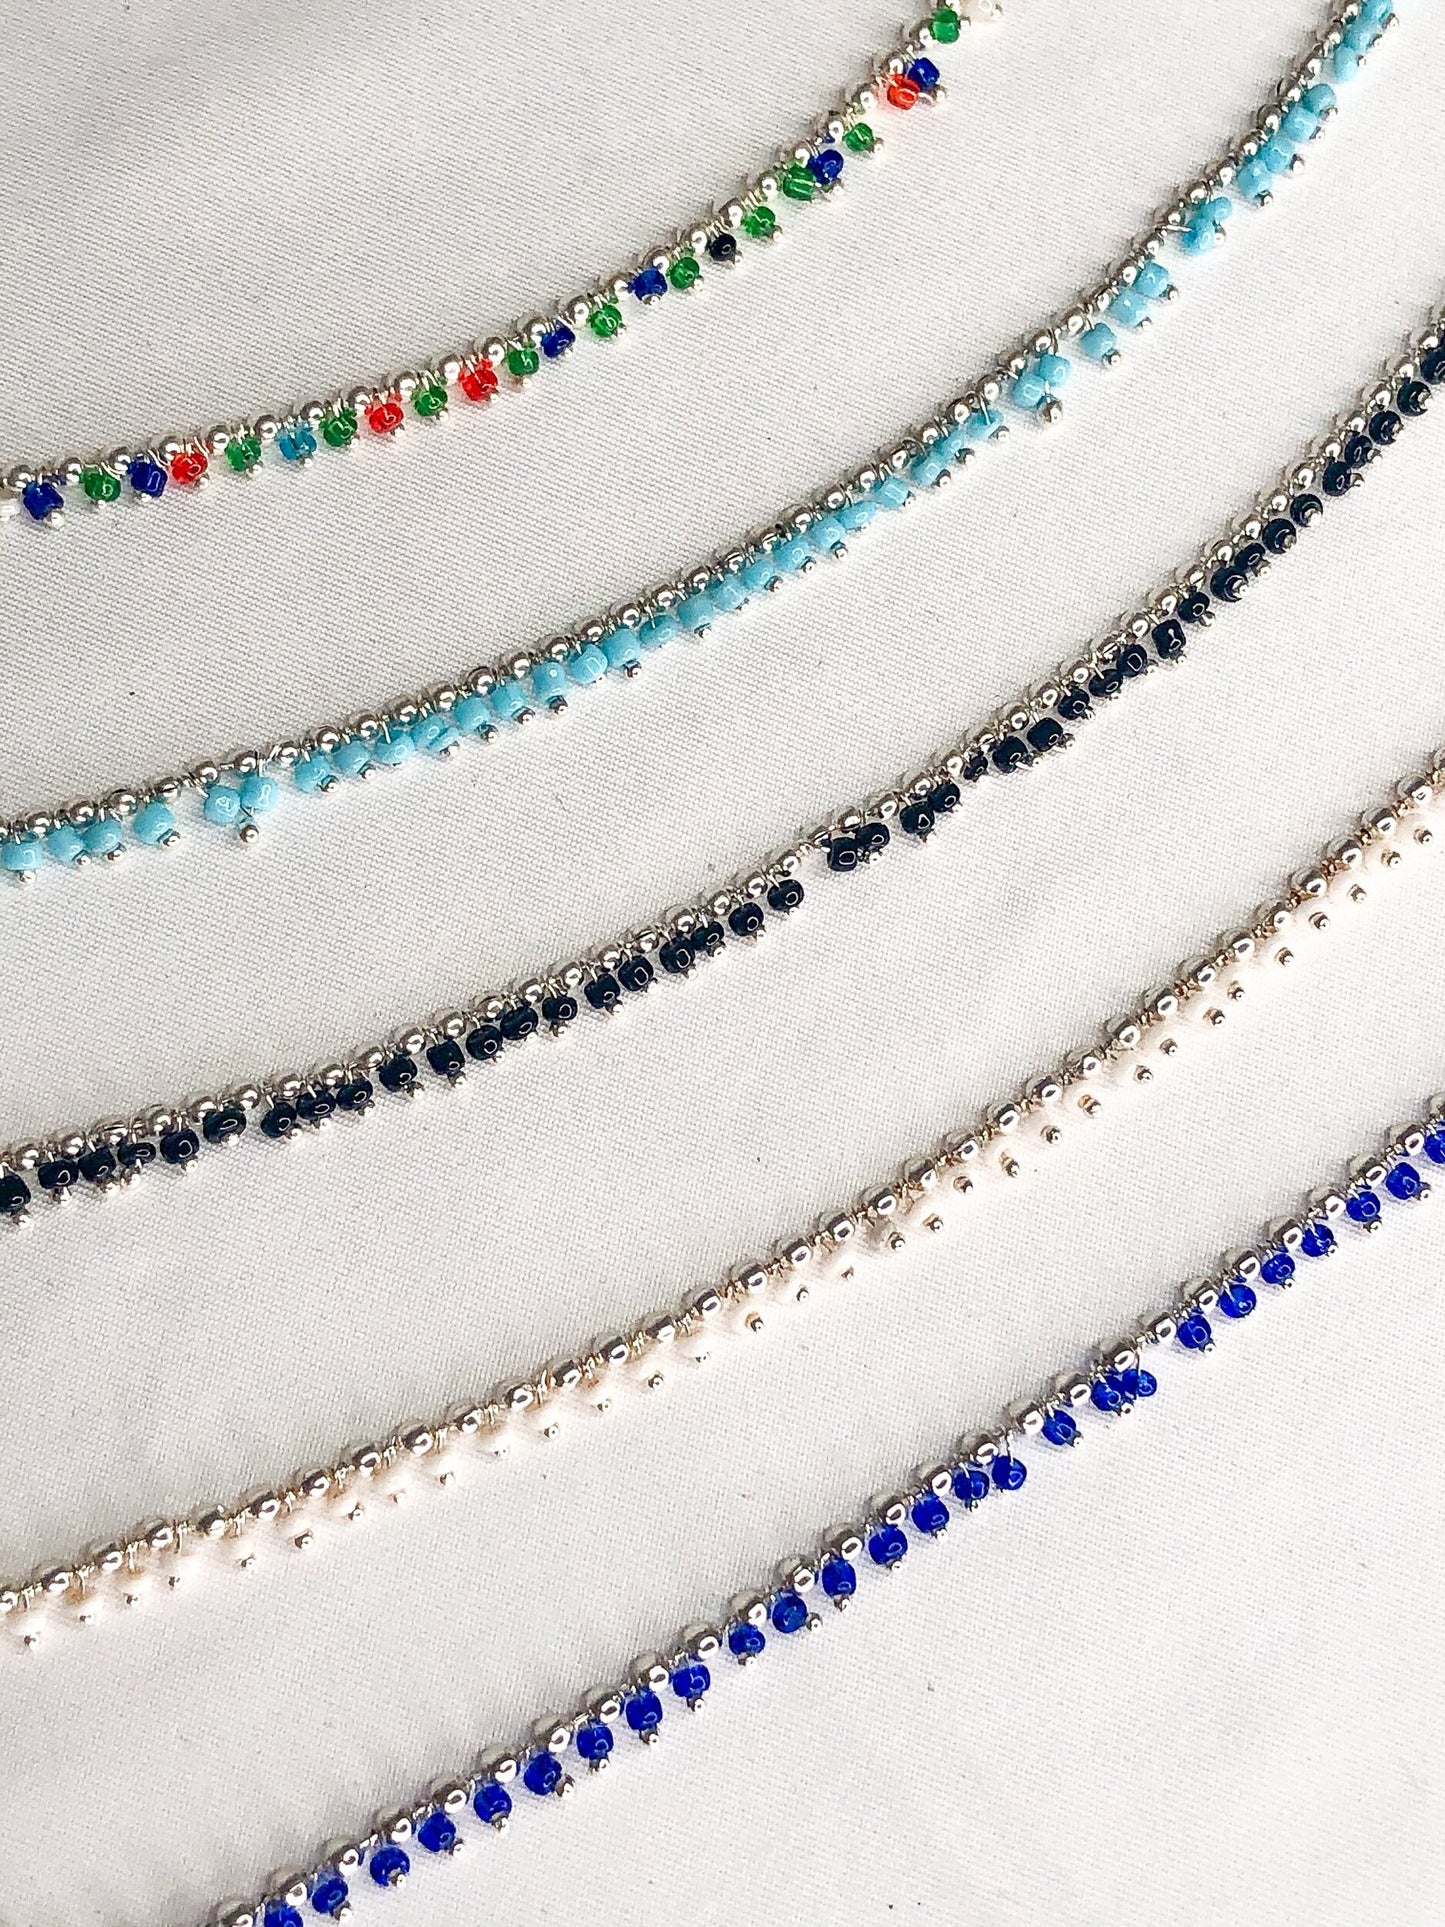 Beaded Anklets